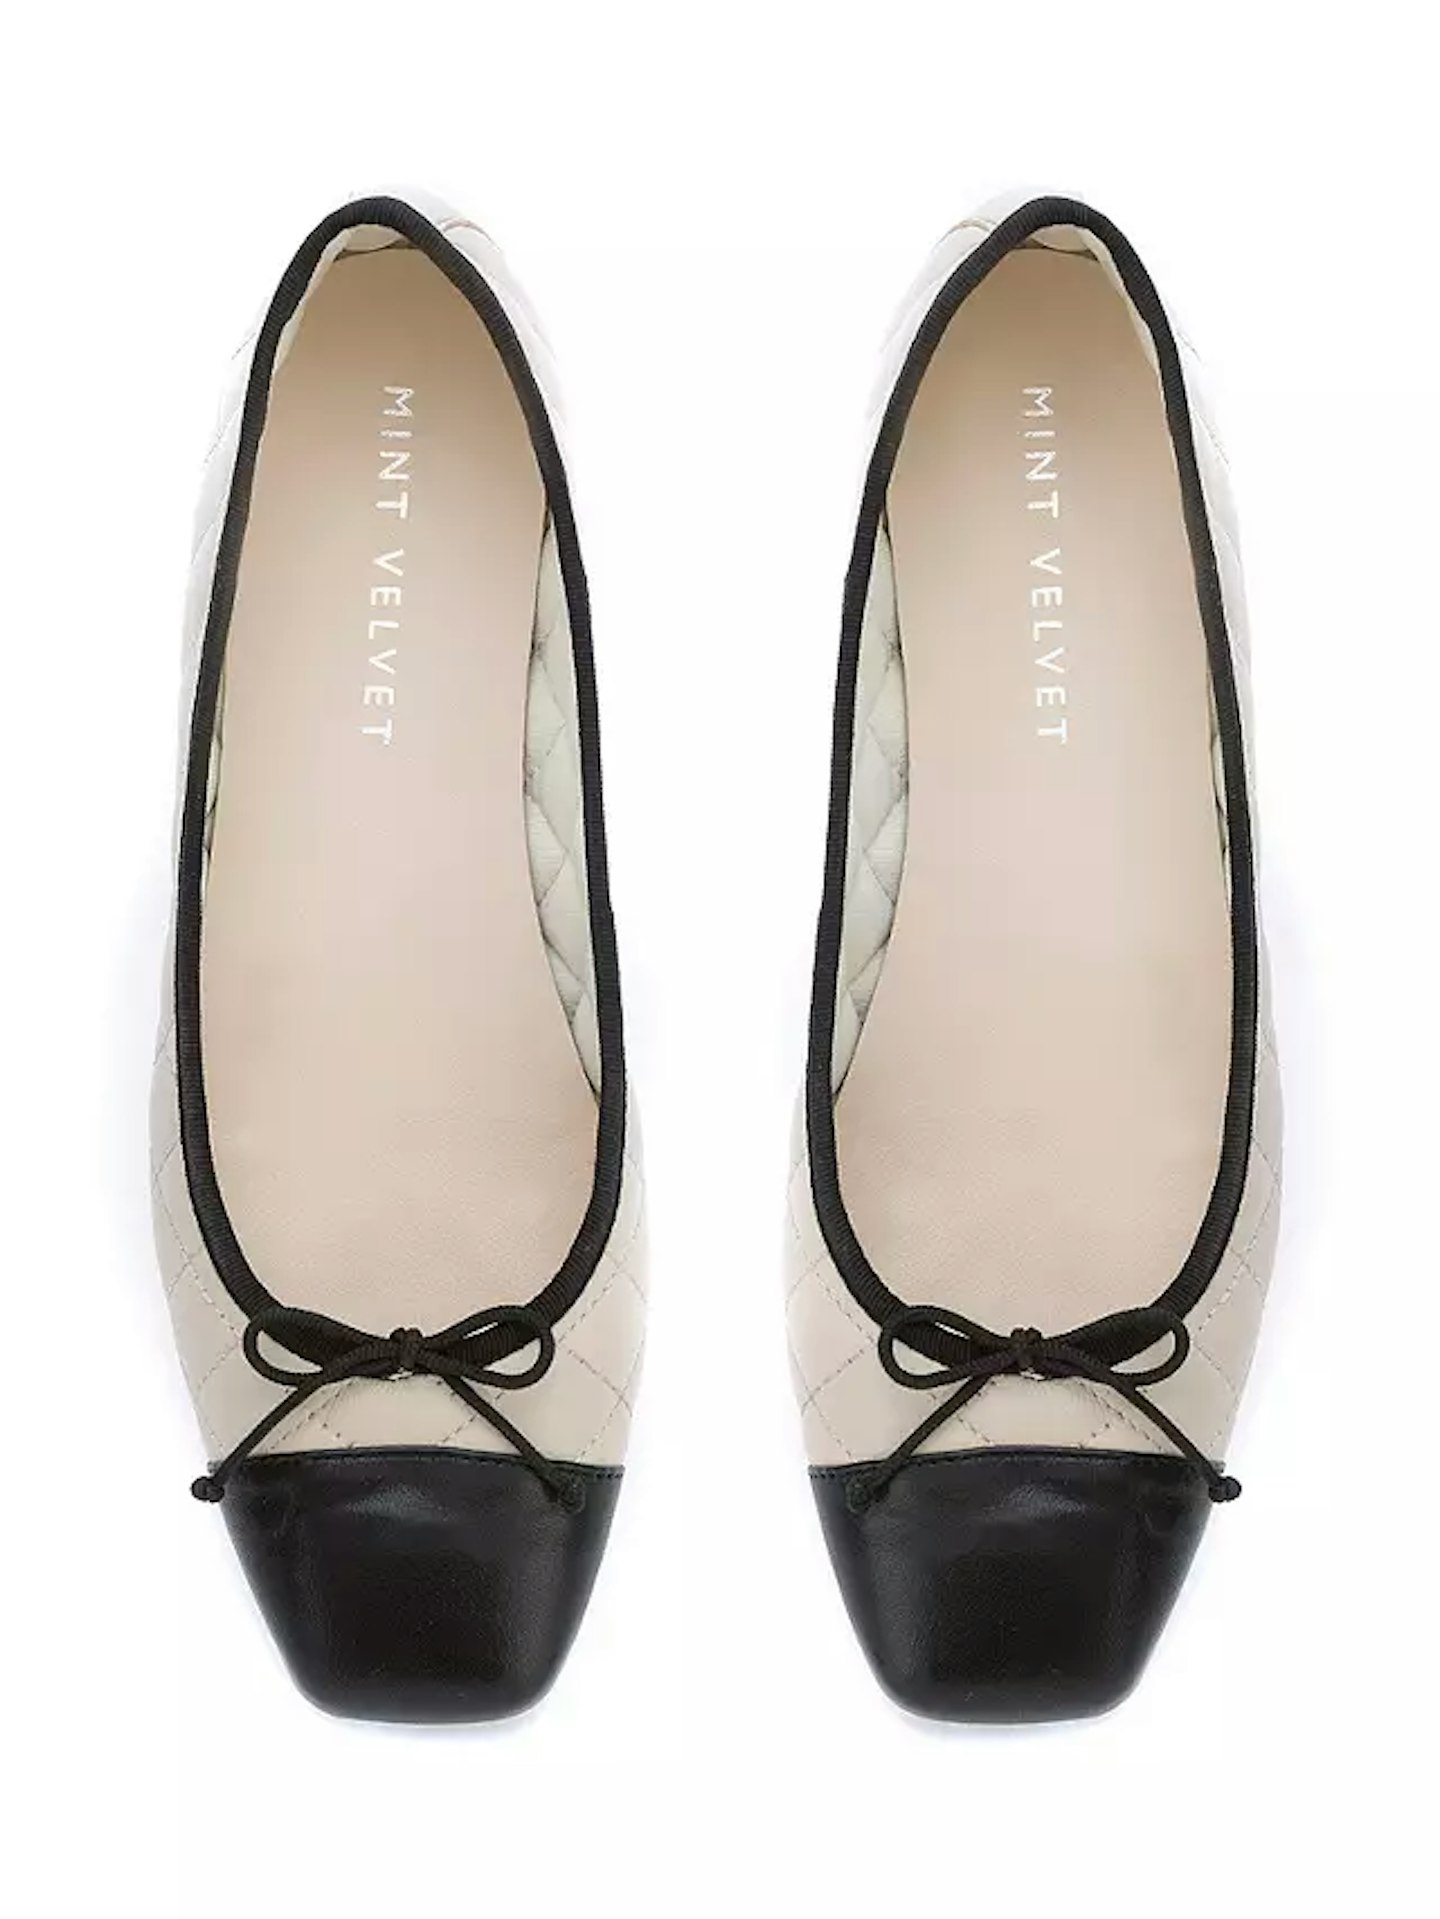 Best Chanel Pumps Dupes 2023: Ballet Flats Inspired by Chanel